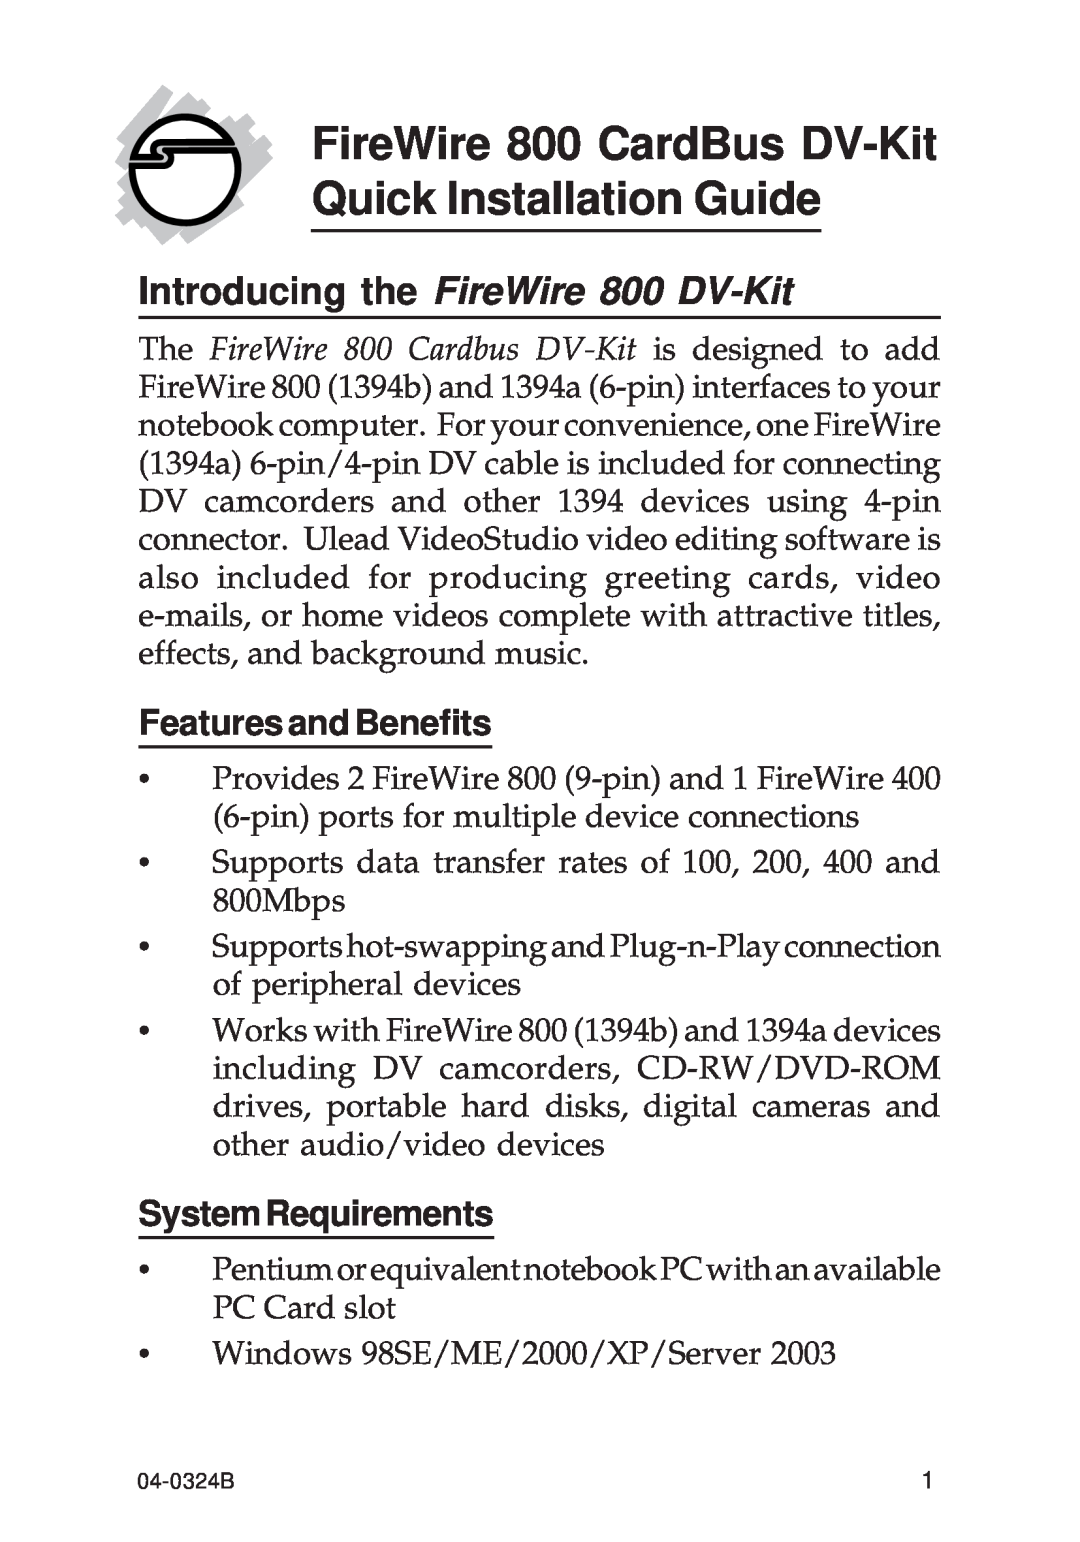 SIIG 700 manual Features and Benefits, SystemRequirements, FireWire 800 CardBus DV-Kit Quick Installation Guide 